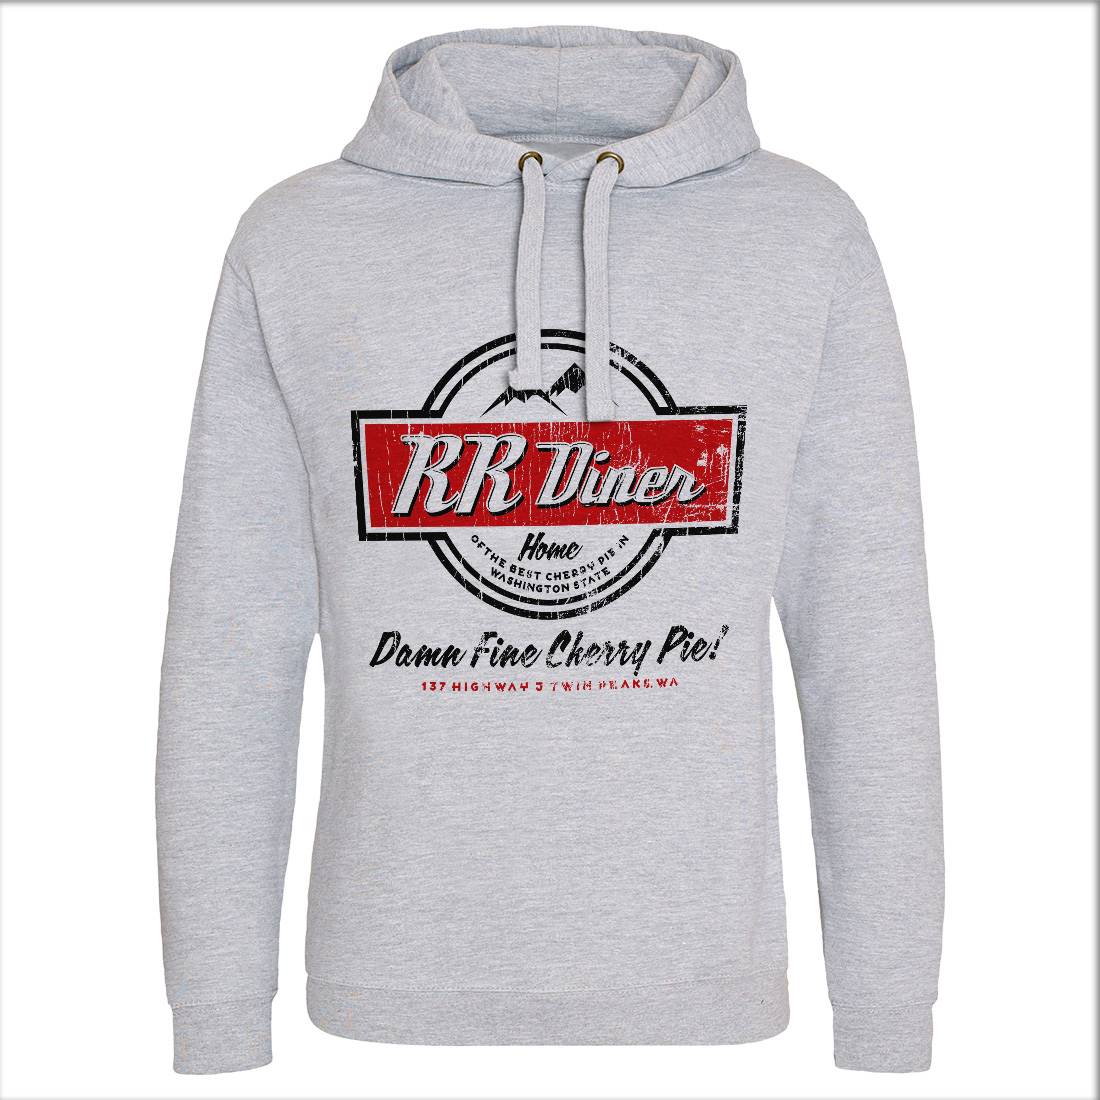 Double Rr Diner Mens Hoodie Without Pocket Horror D335